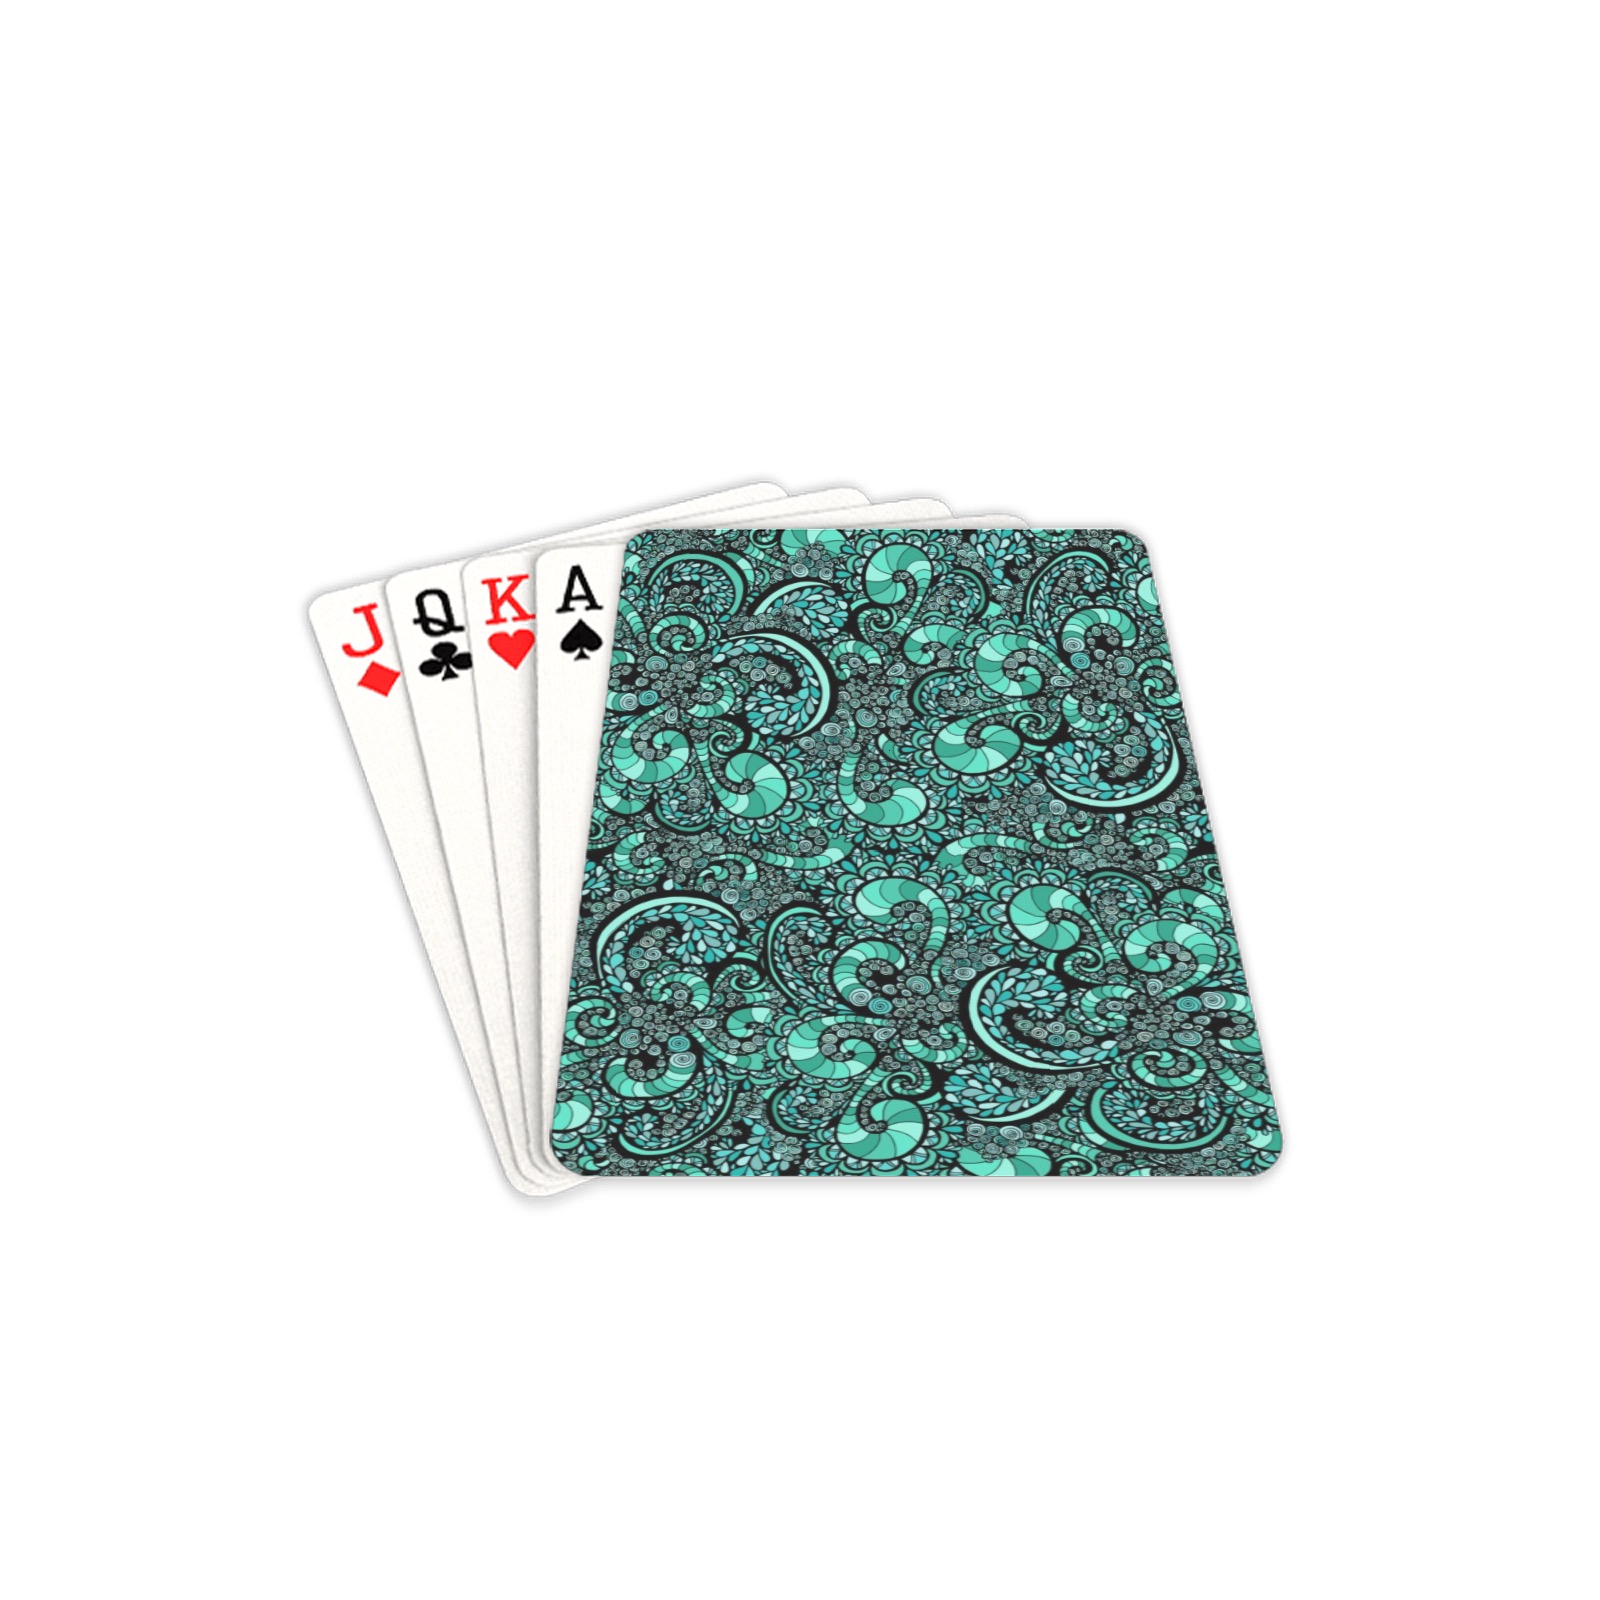 Seafoam Shores Playing Cards 2.5"x3.5"